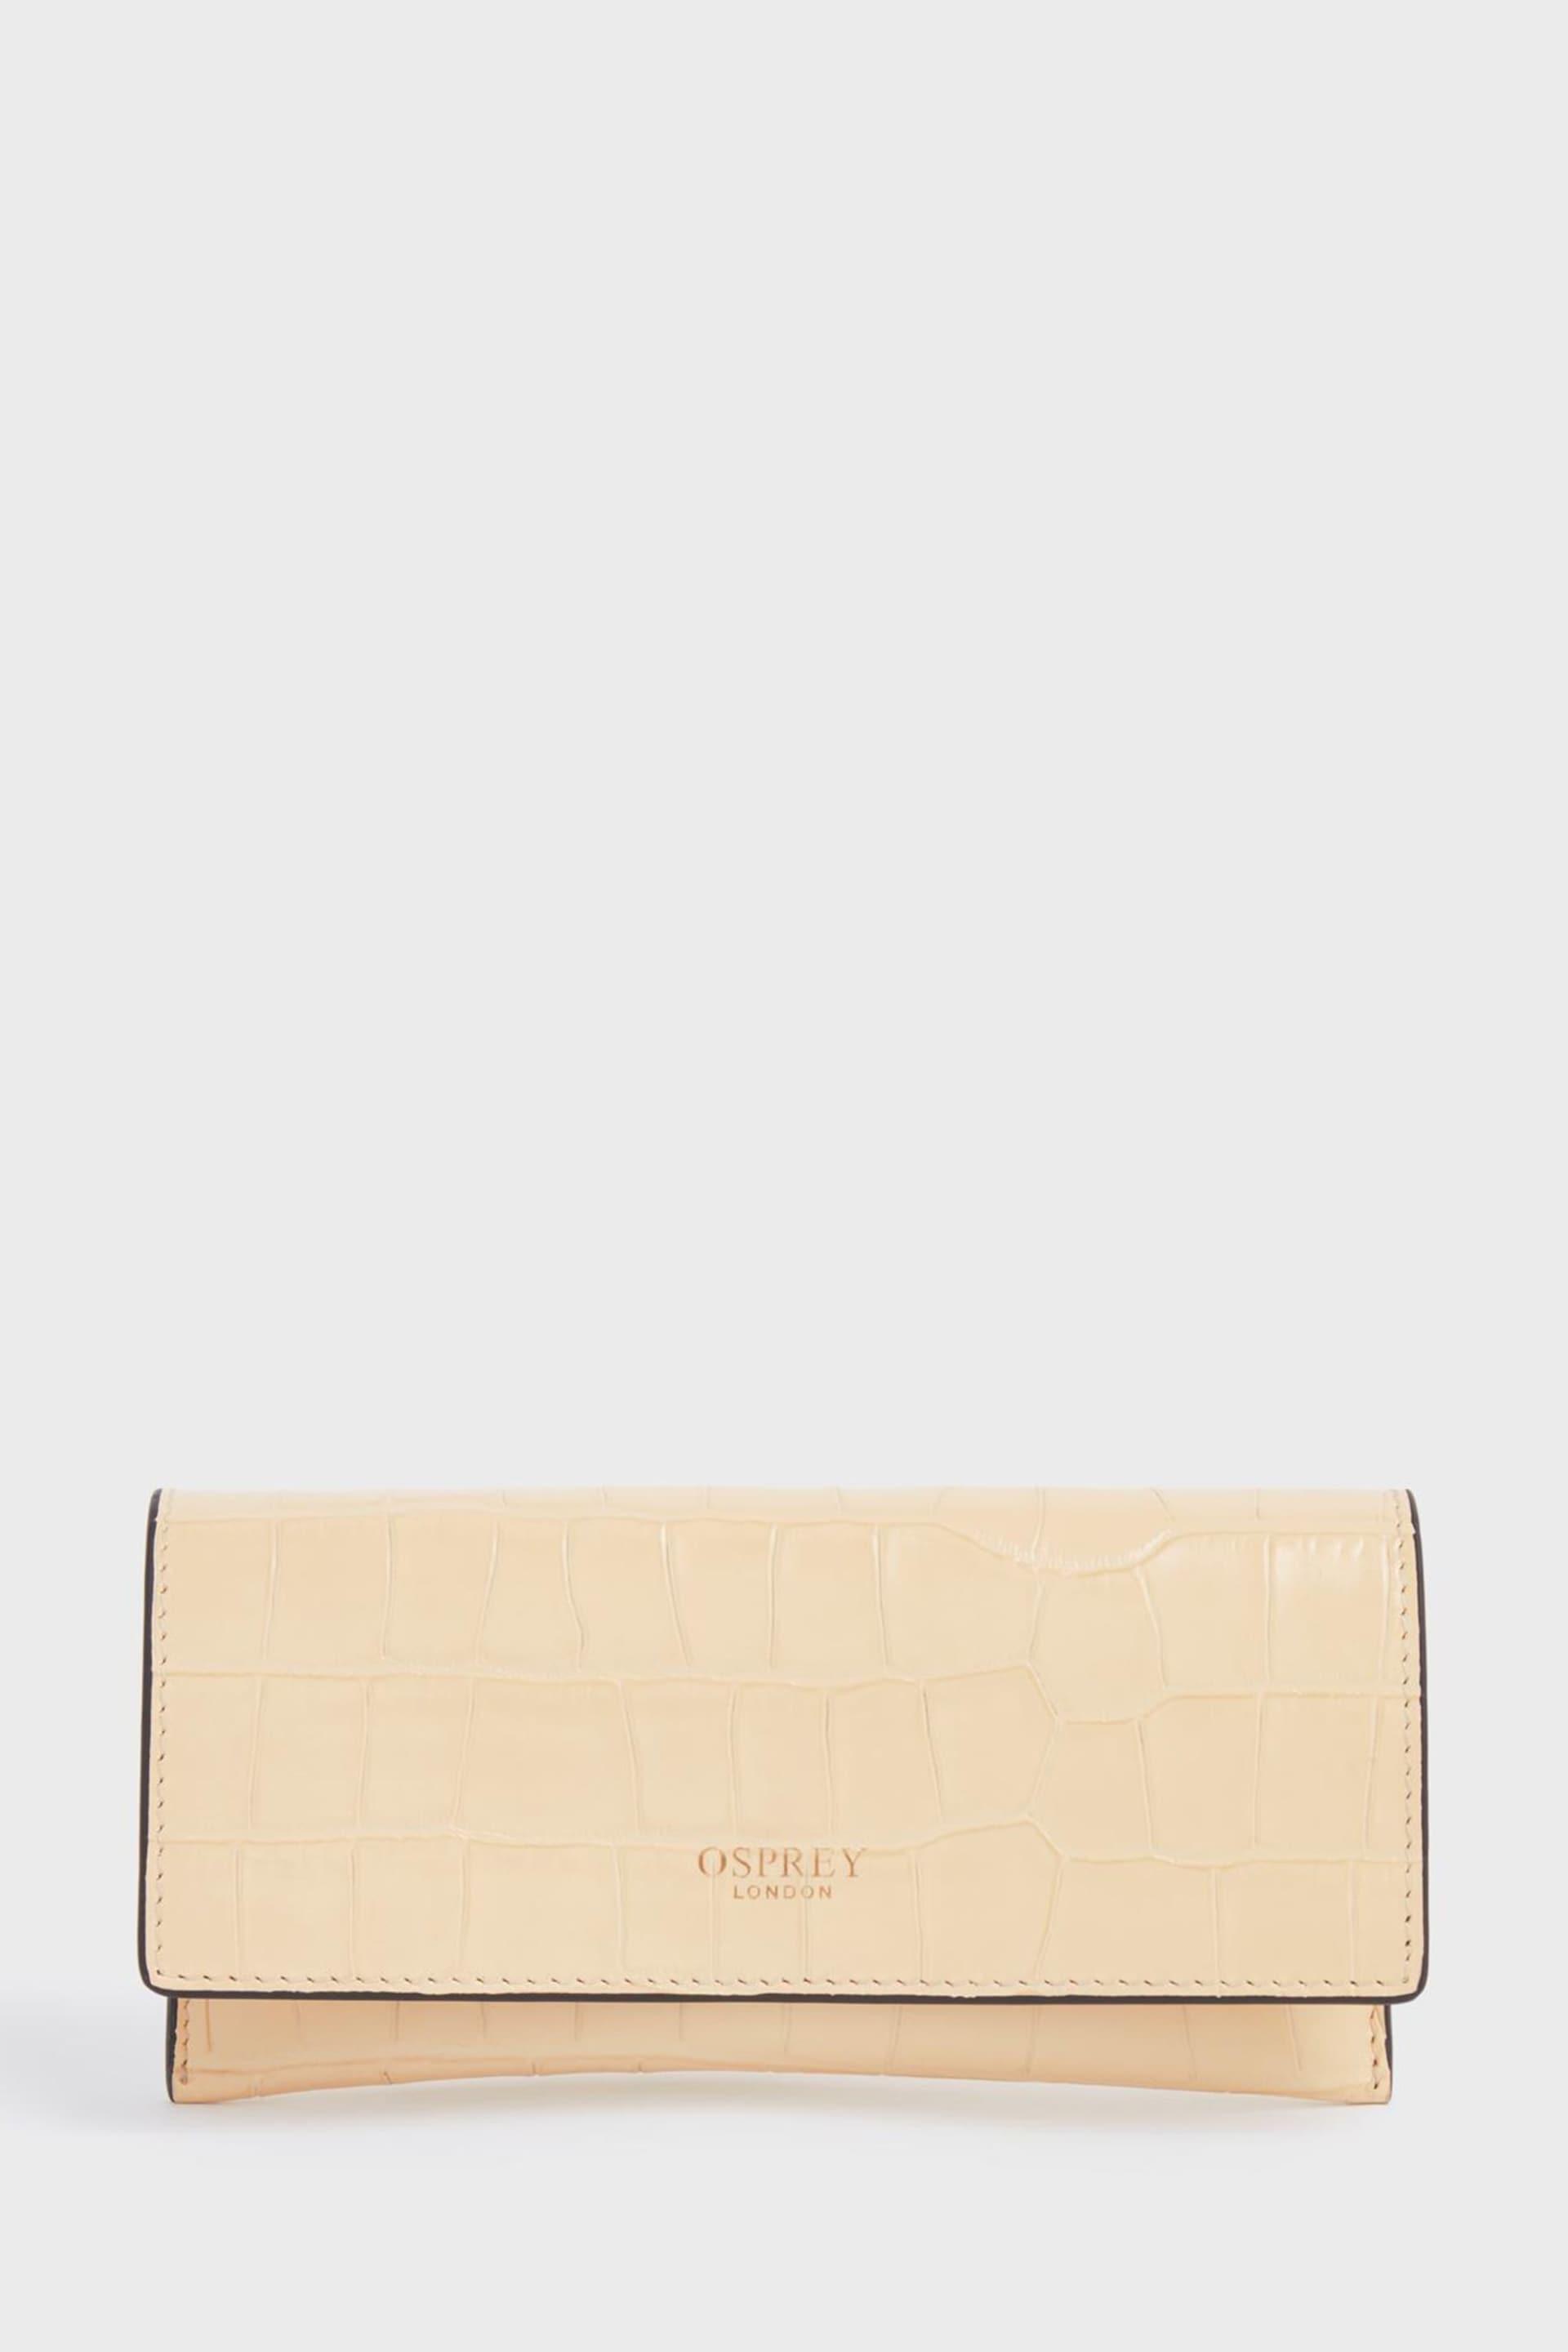 Osprey London Natural The Ludlow Leather Glasses Case - Image 1 of 3